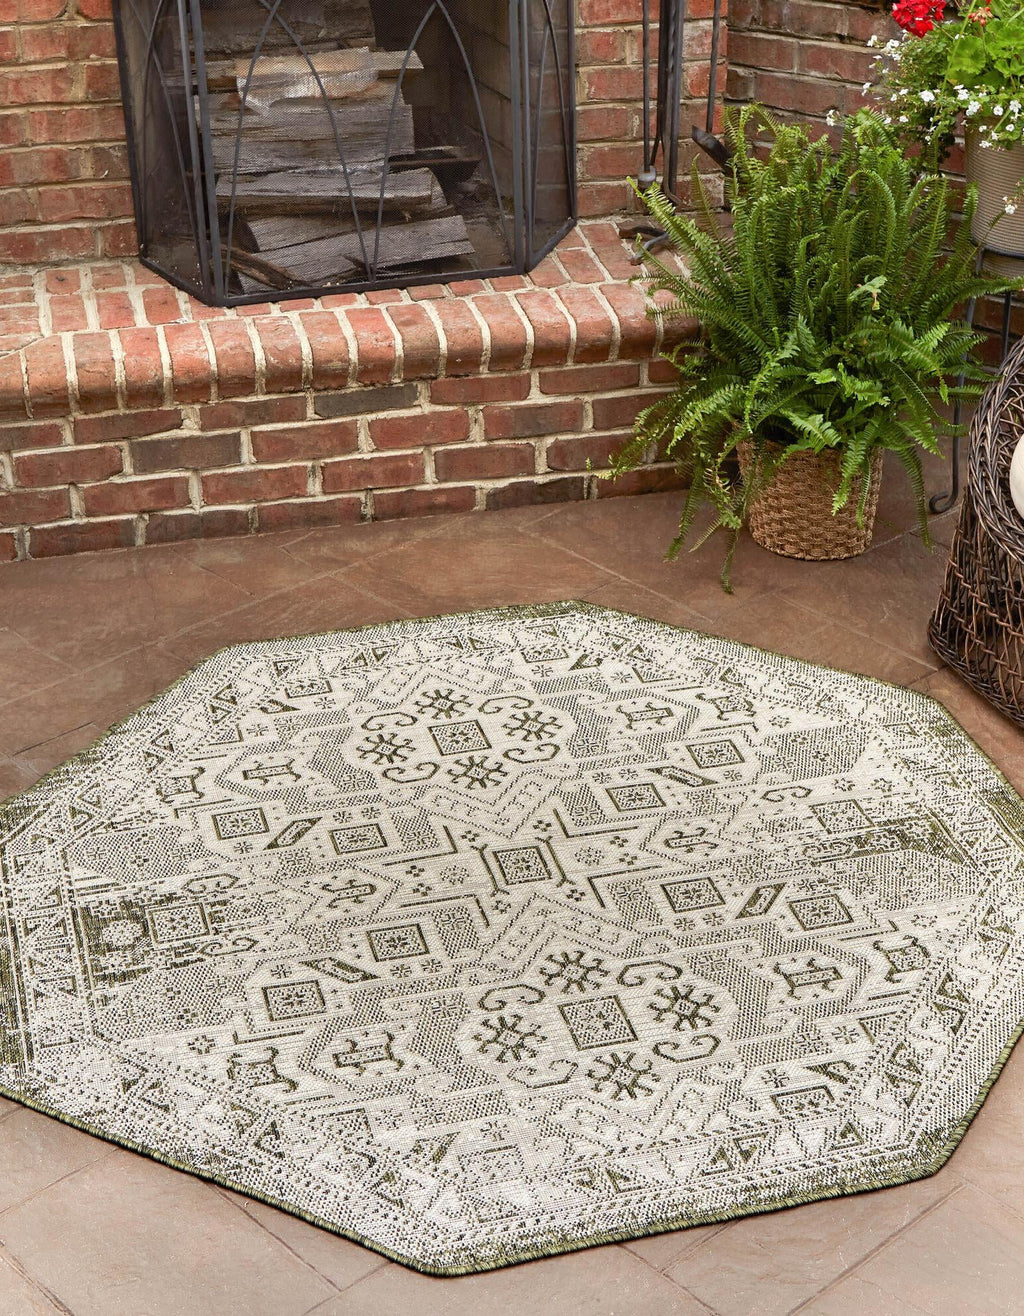 Unique Loom Outdoor Aztec T-KZOD16 Green Area Rug Octagon Lifestyle Image Feature